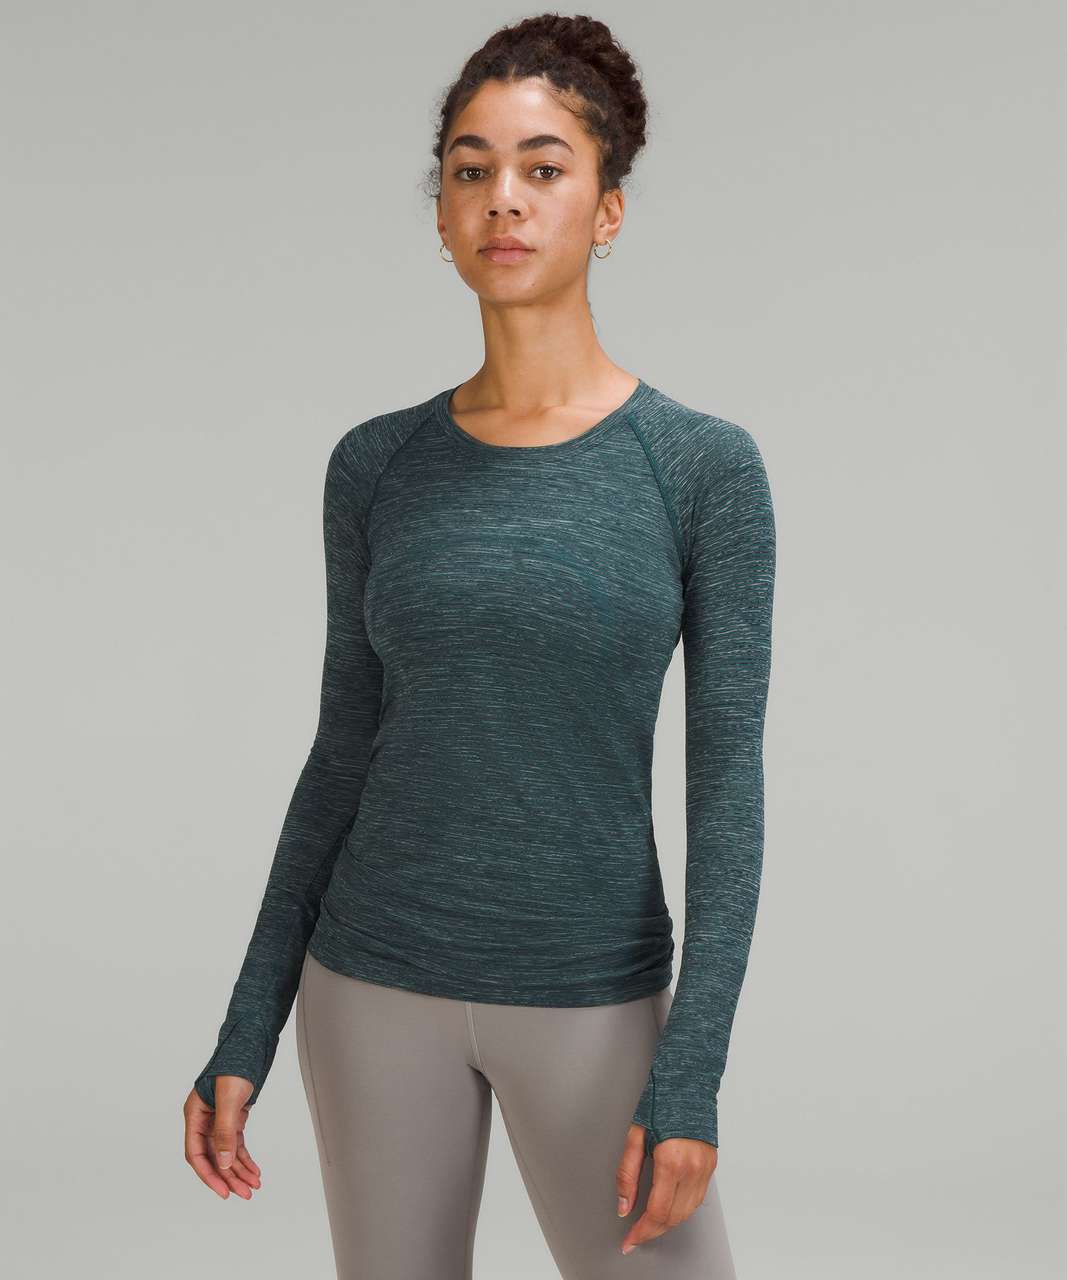 Lululemon Swiftly Tech Long Sleeve Shirt 2.0 - Wee Are From Space Green Jasper